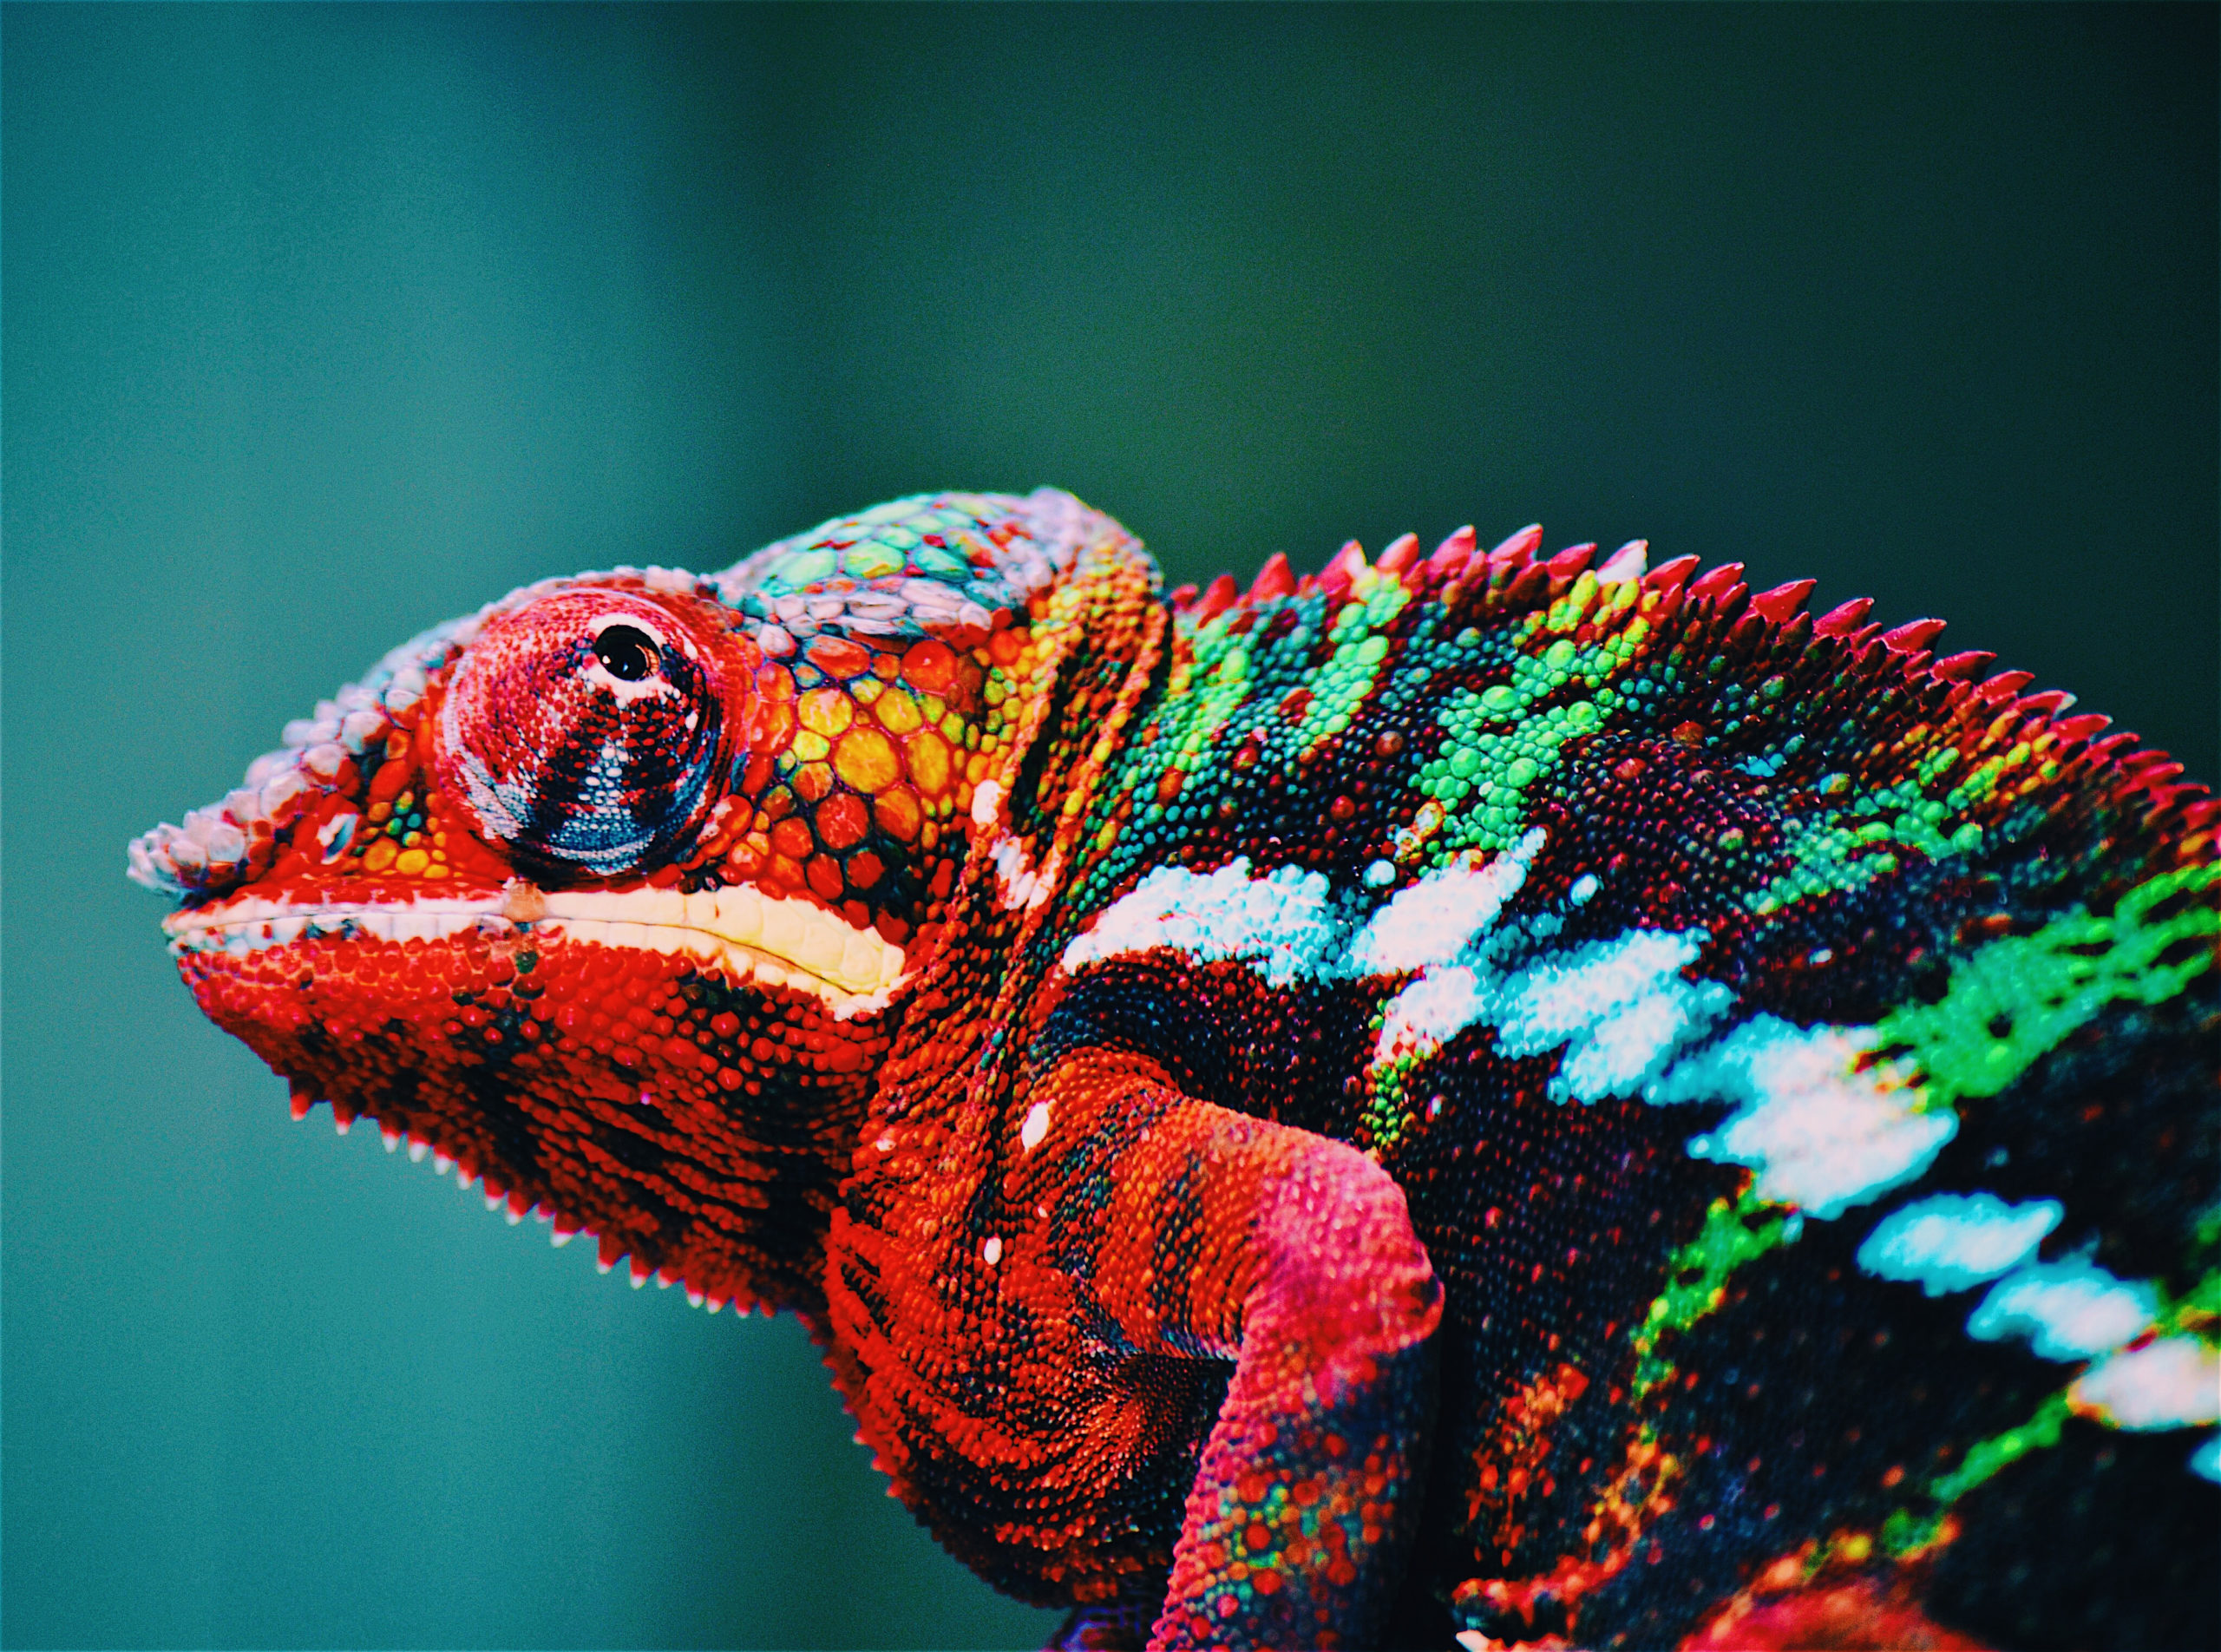 Red Chameleon By George Labada from Pexels